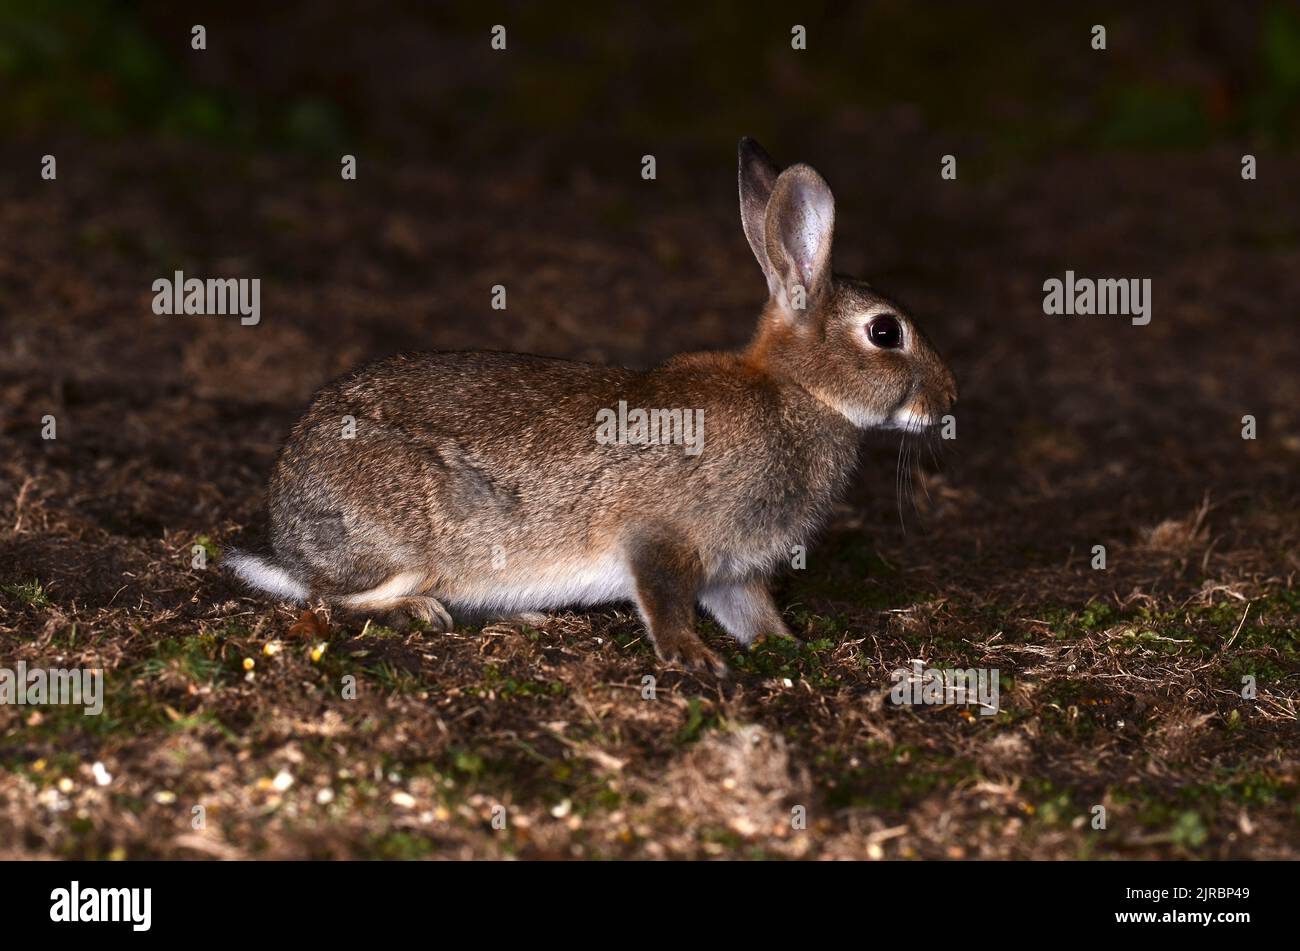 Adult rabbit photographed at night in darkness with flash. Stock Photo